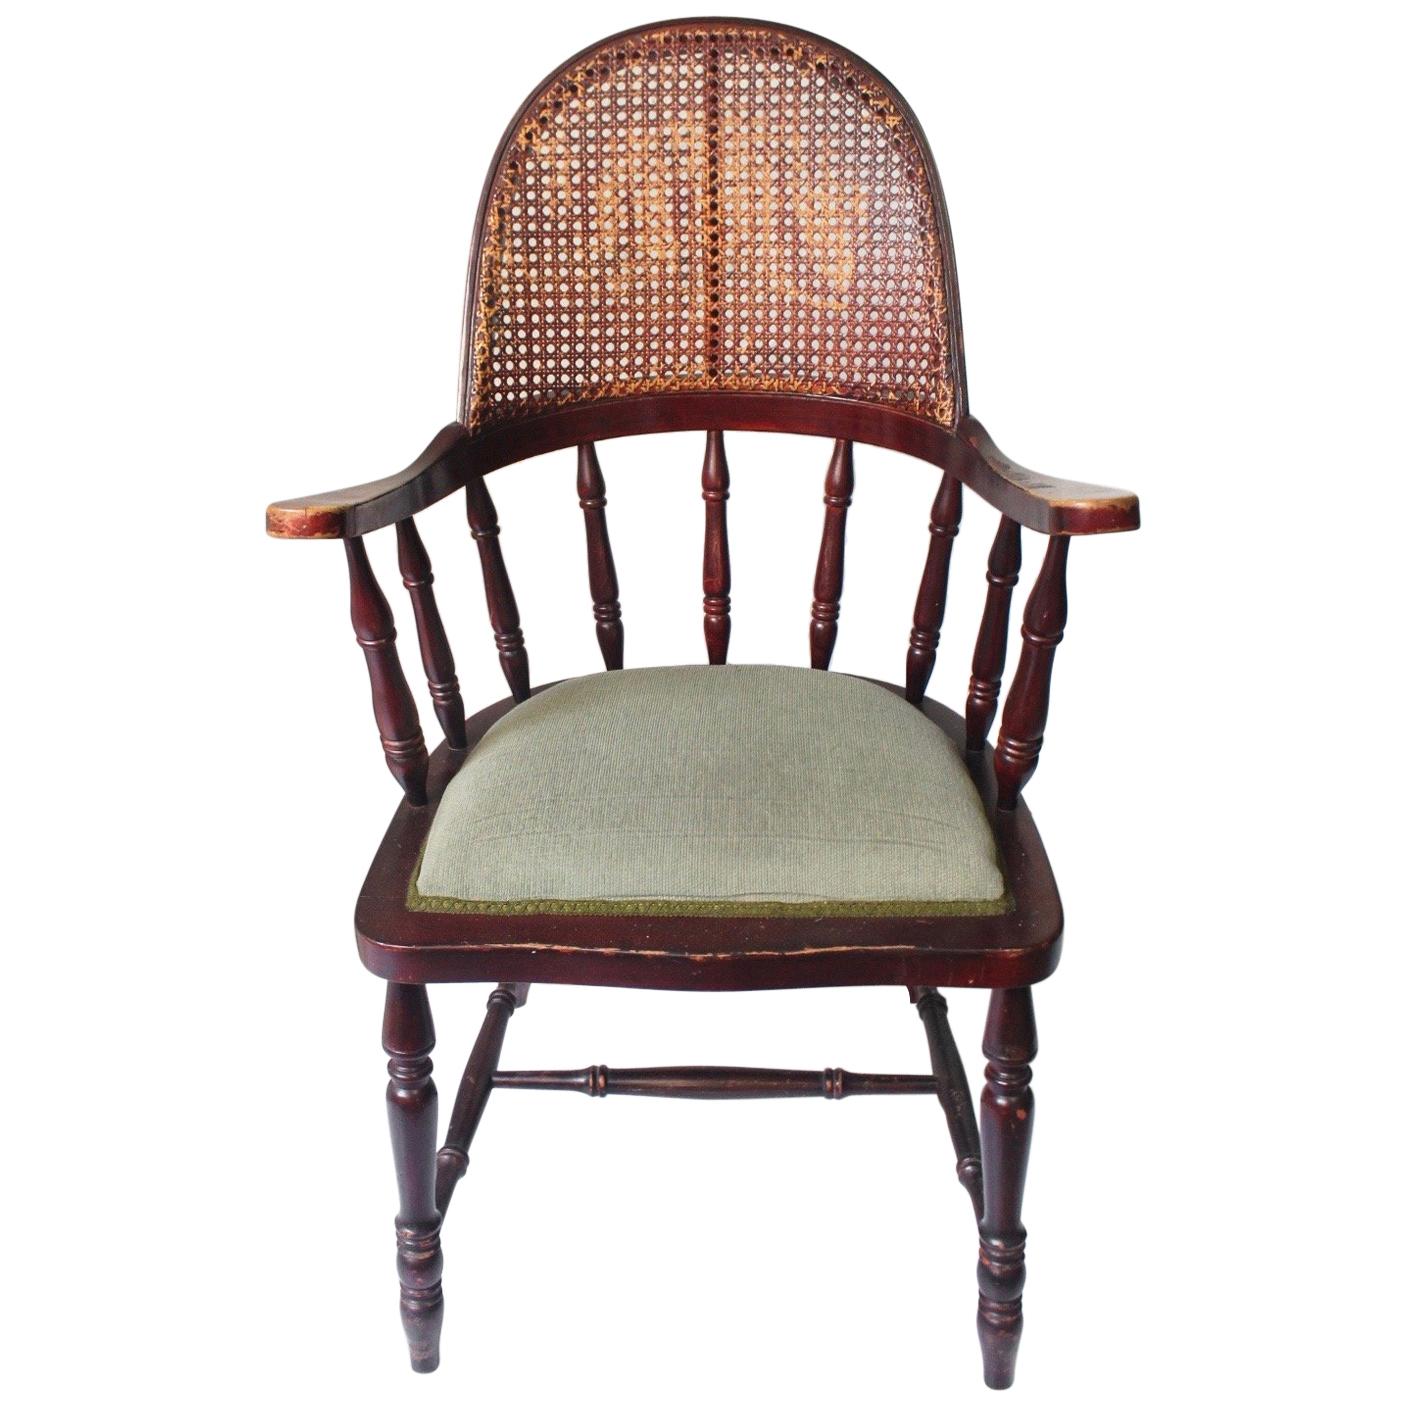 Antique Uncommon English Windsor Stick Back Caned Chair, Late 19th Century For Sale